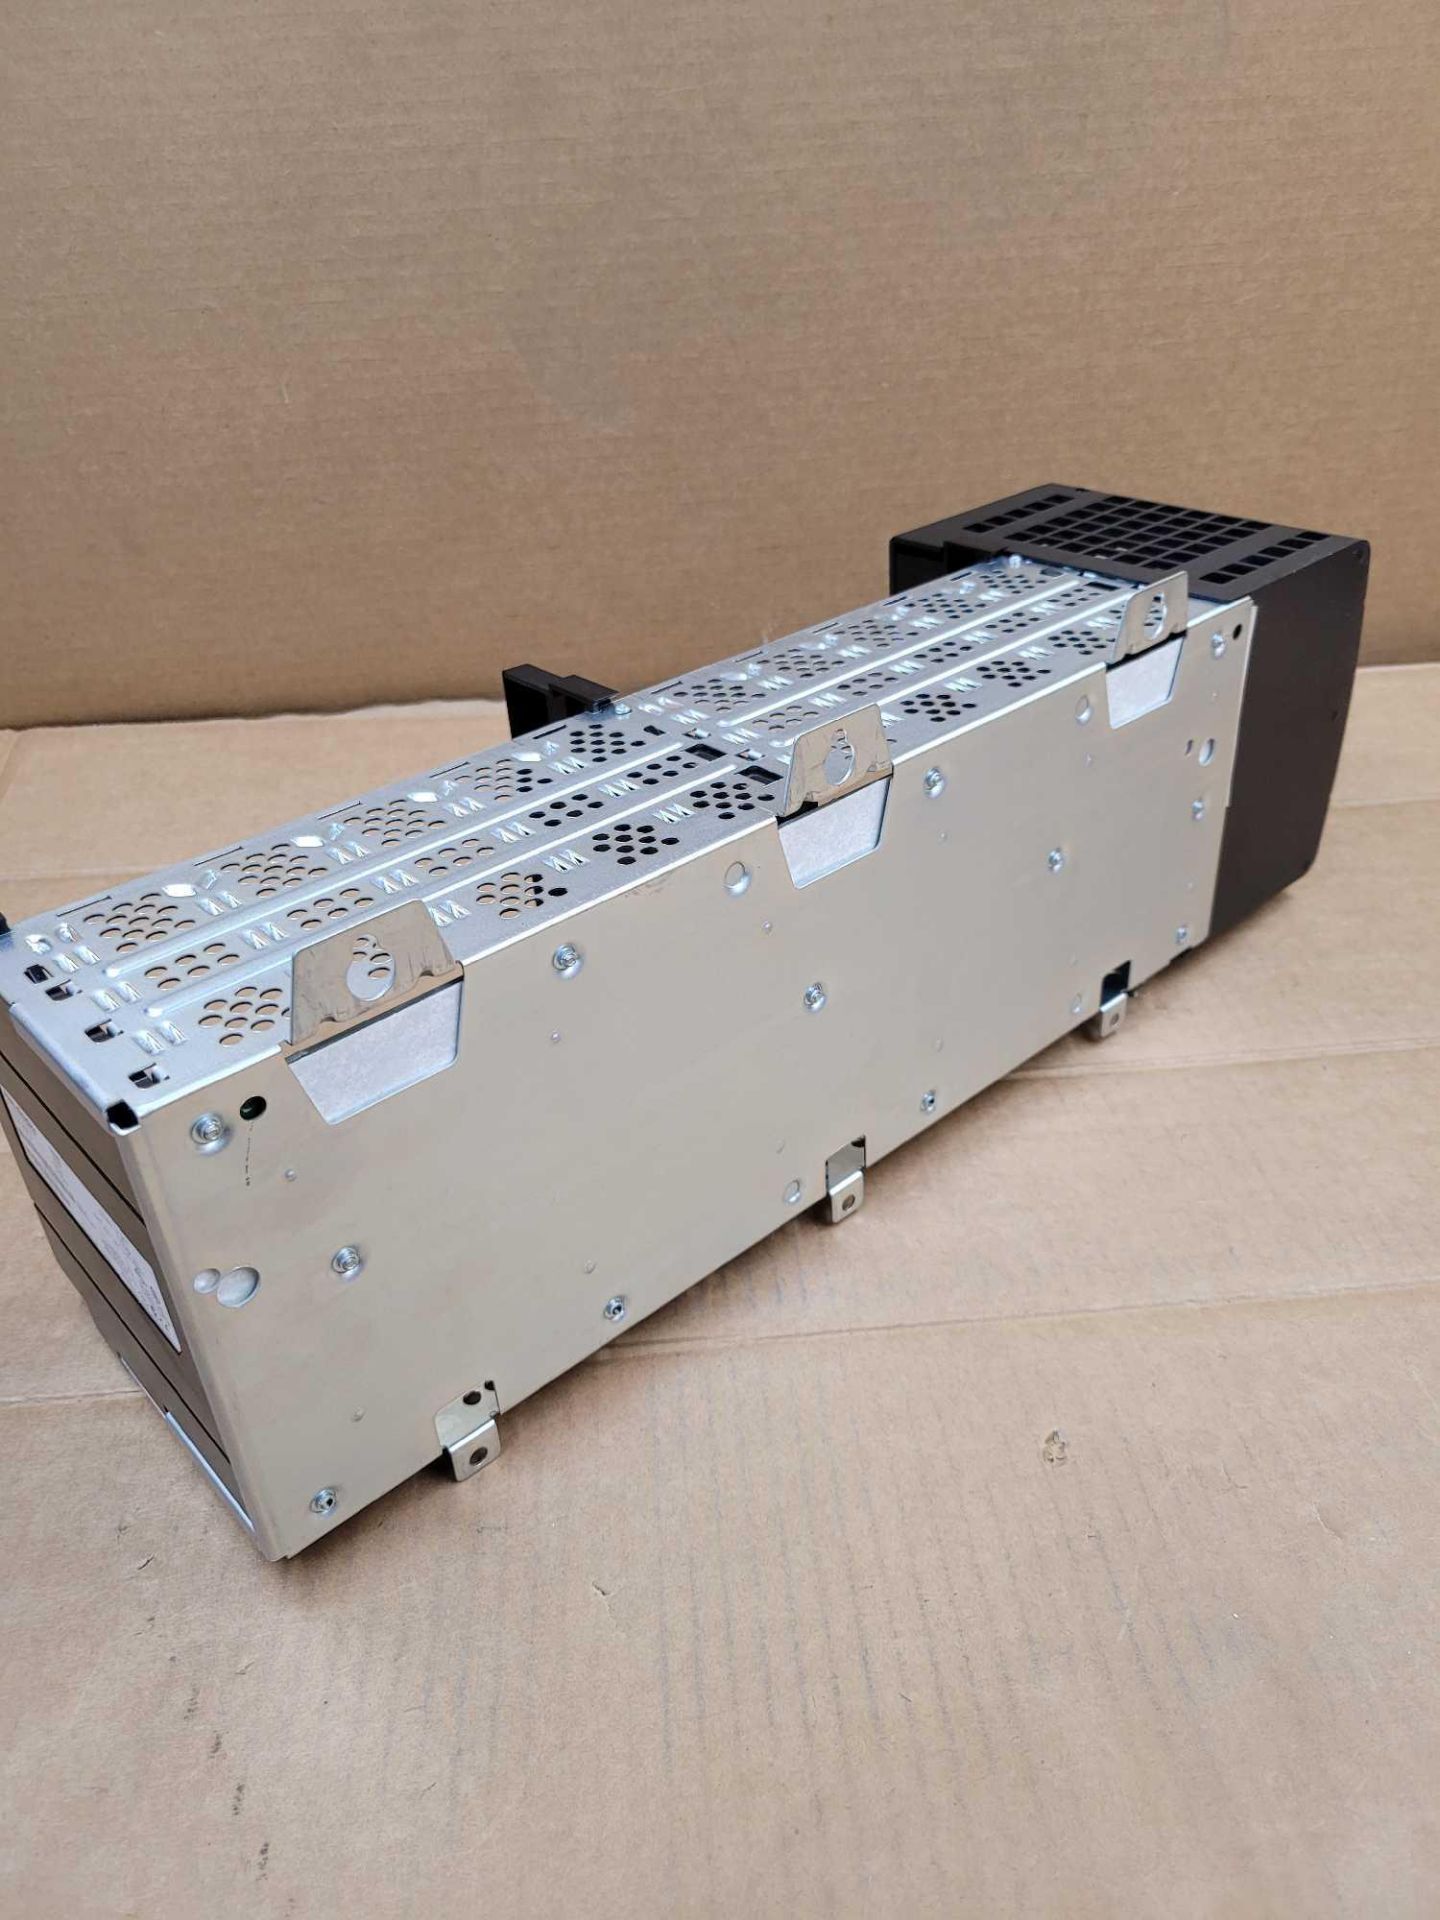 ALLEN BRADLEY 1756-PA75 with 1756-A10 / Series B ControlLogix Power Supply with Series B 10 Slot PLC - Image 8 of 8